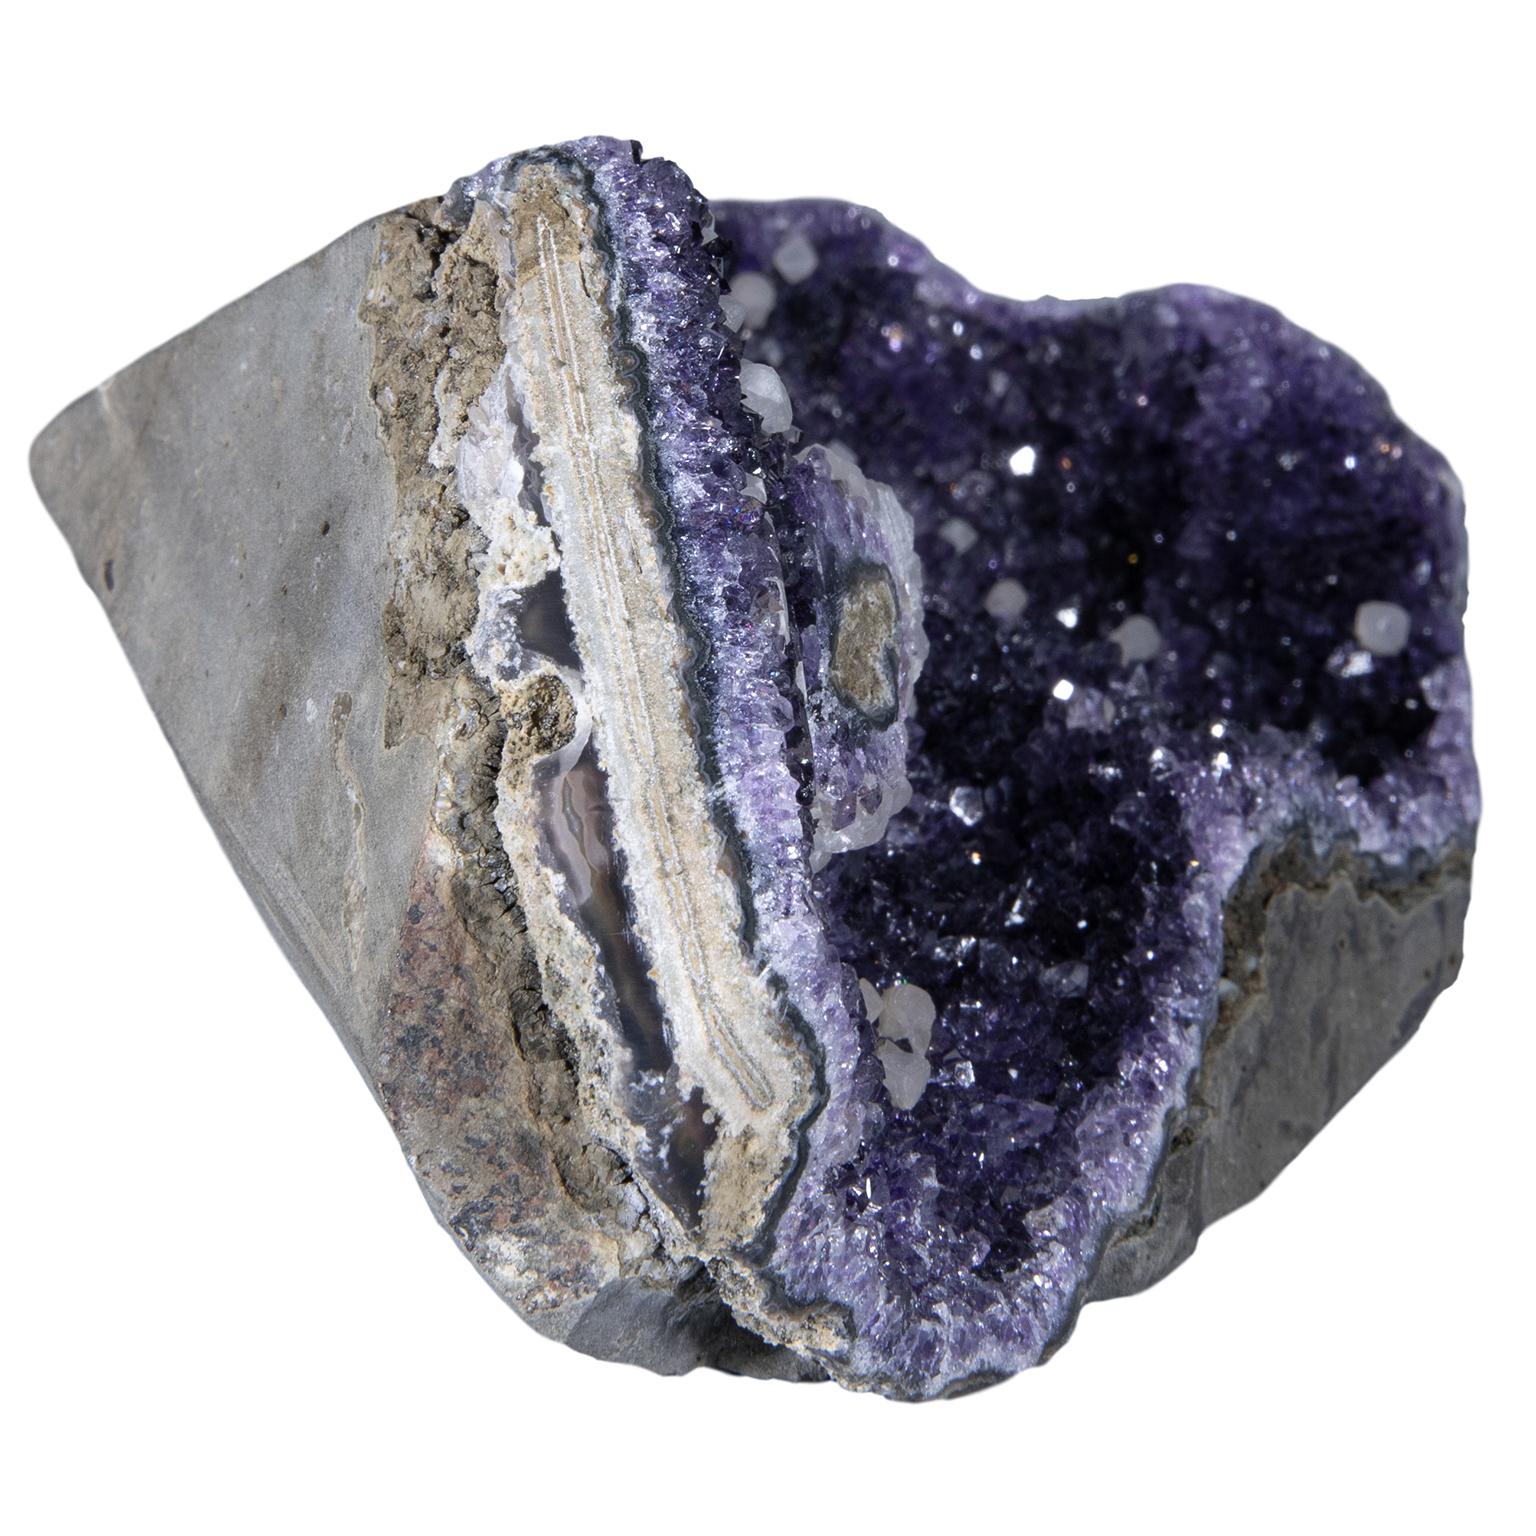 A stunning rough amethyst cluster with calcite crystals.

This piece has an exquisite purple color and a calcite formation on the top. To further add to its beauty, this piece has calcite crystal 